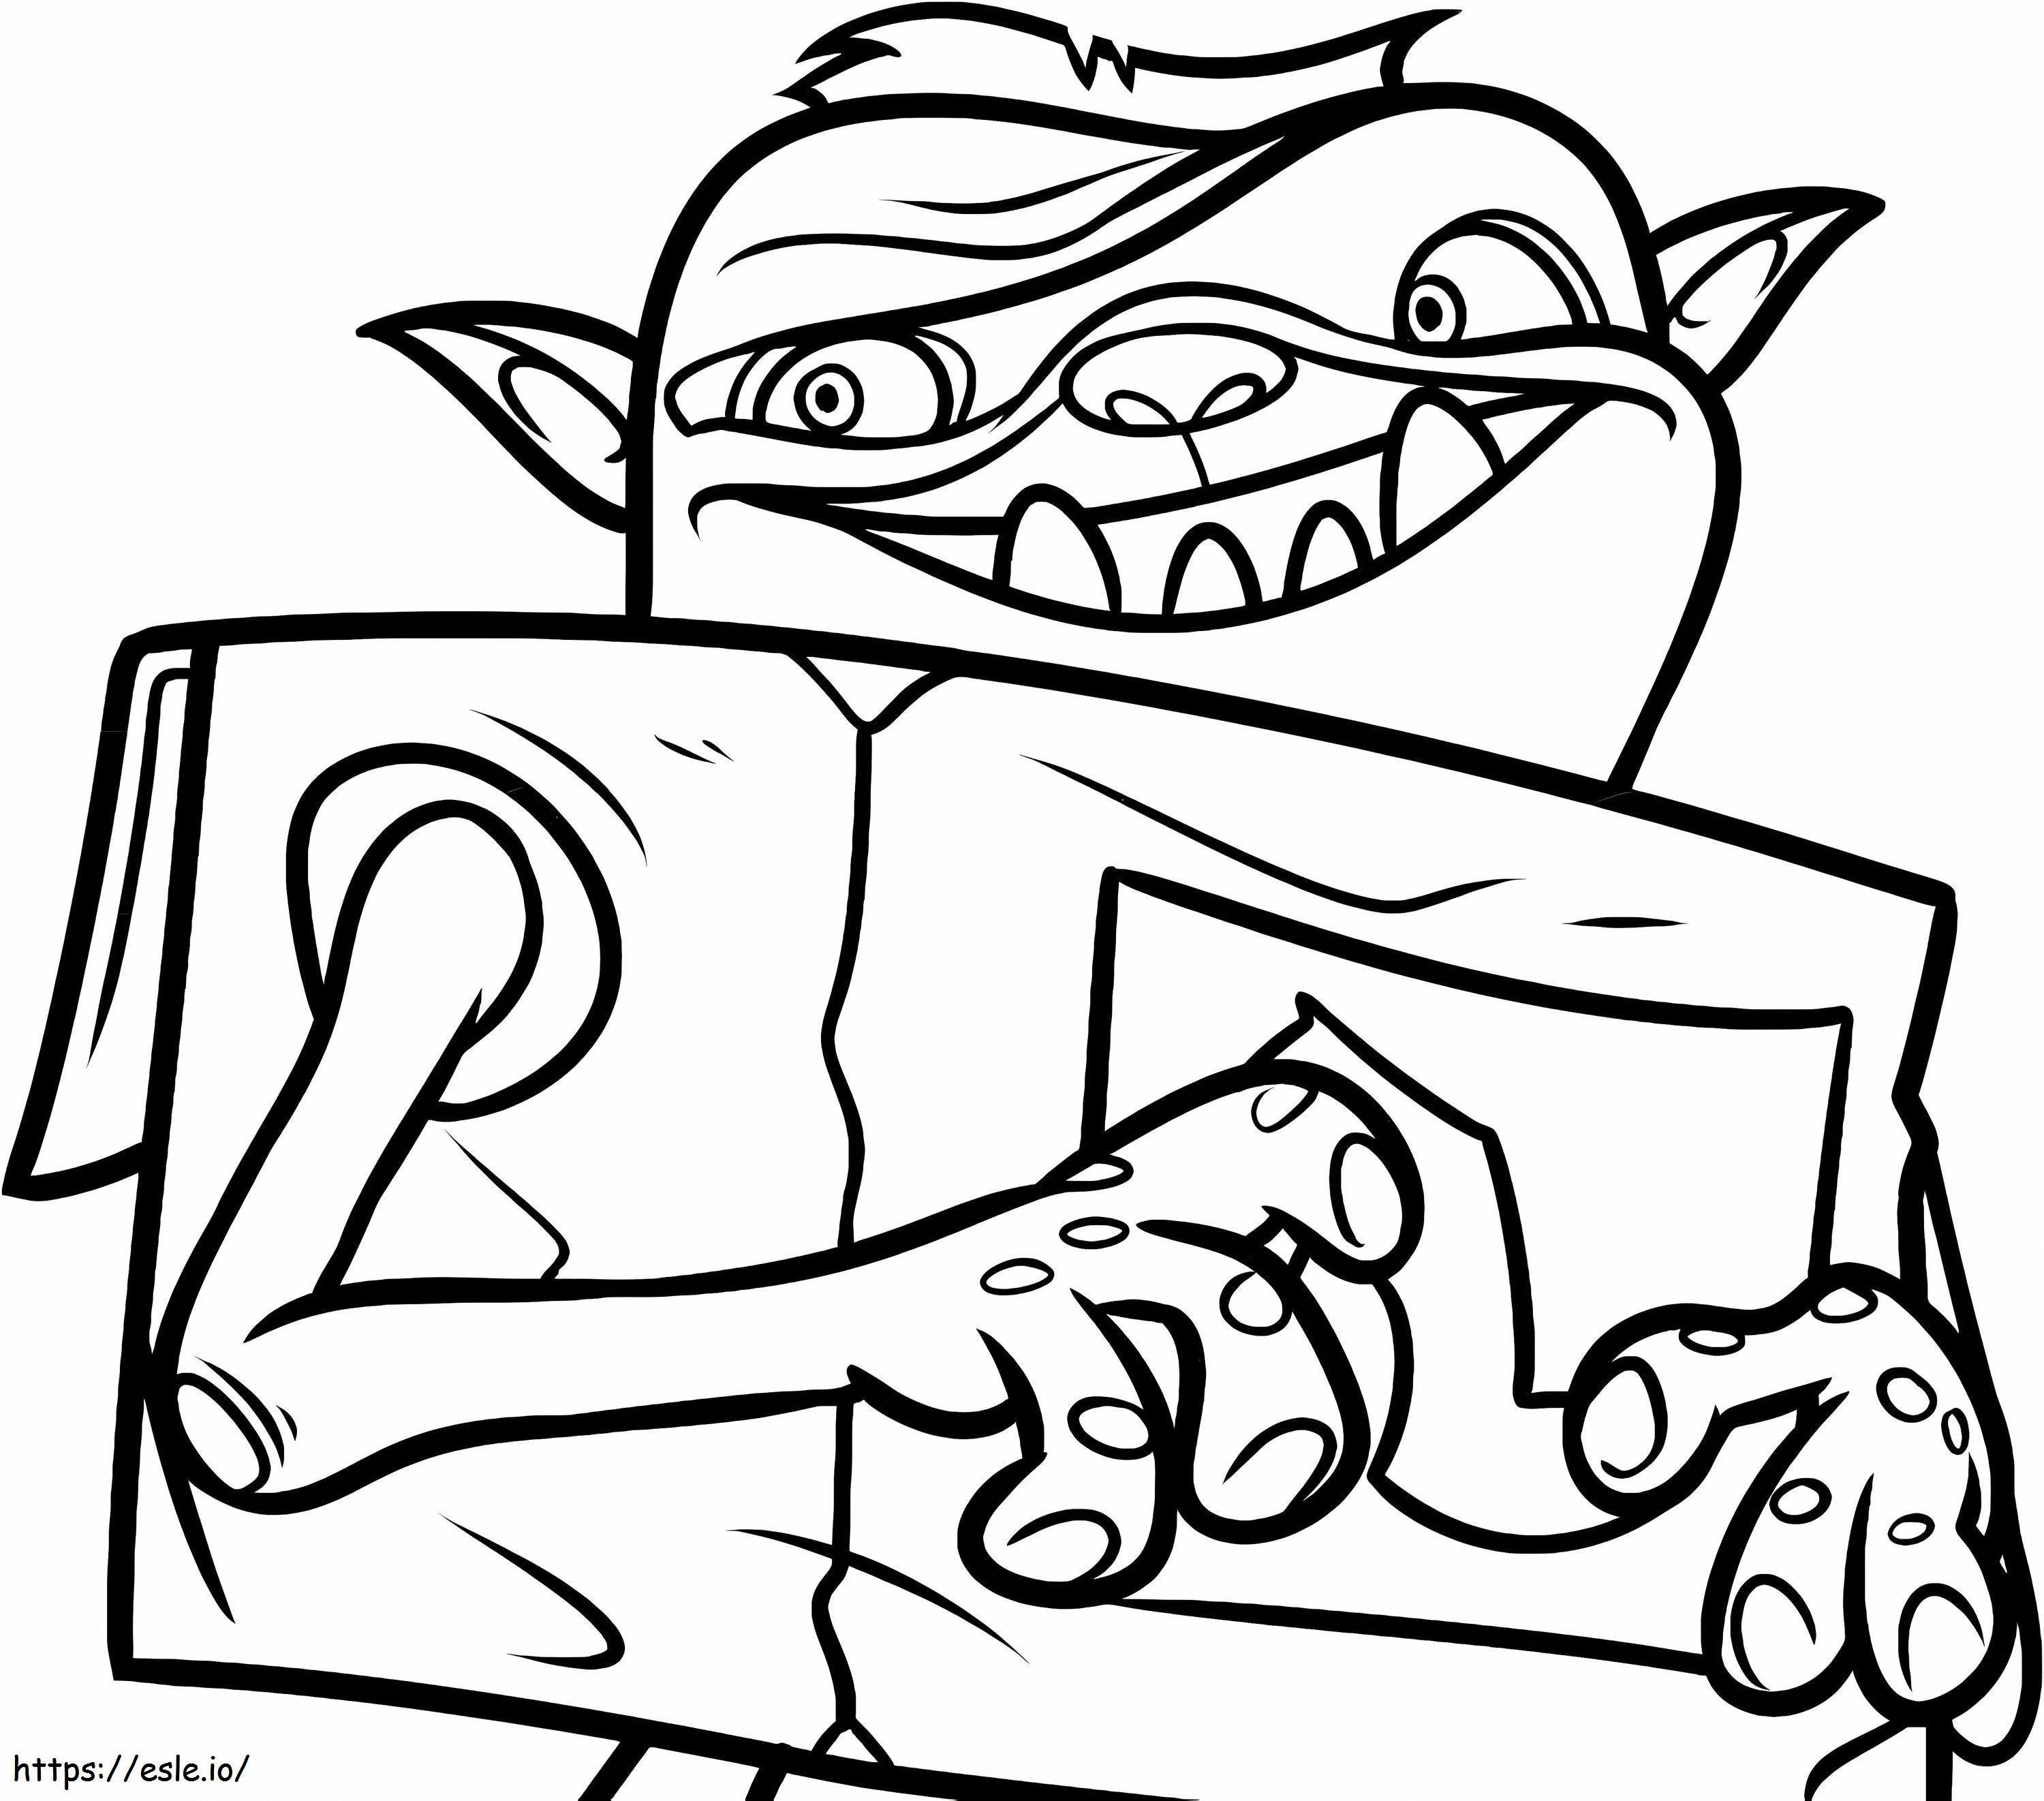 Shoe From Boxtrolls coloring page